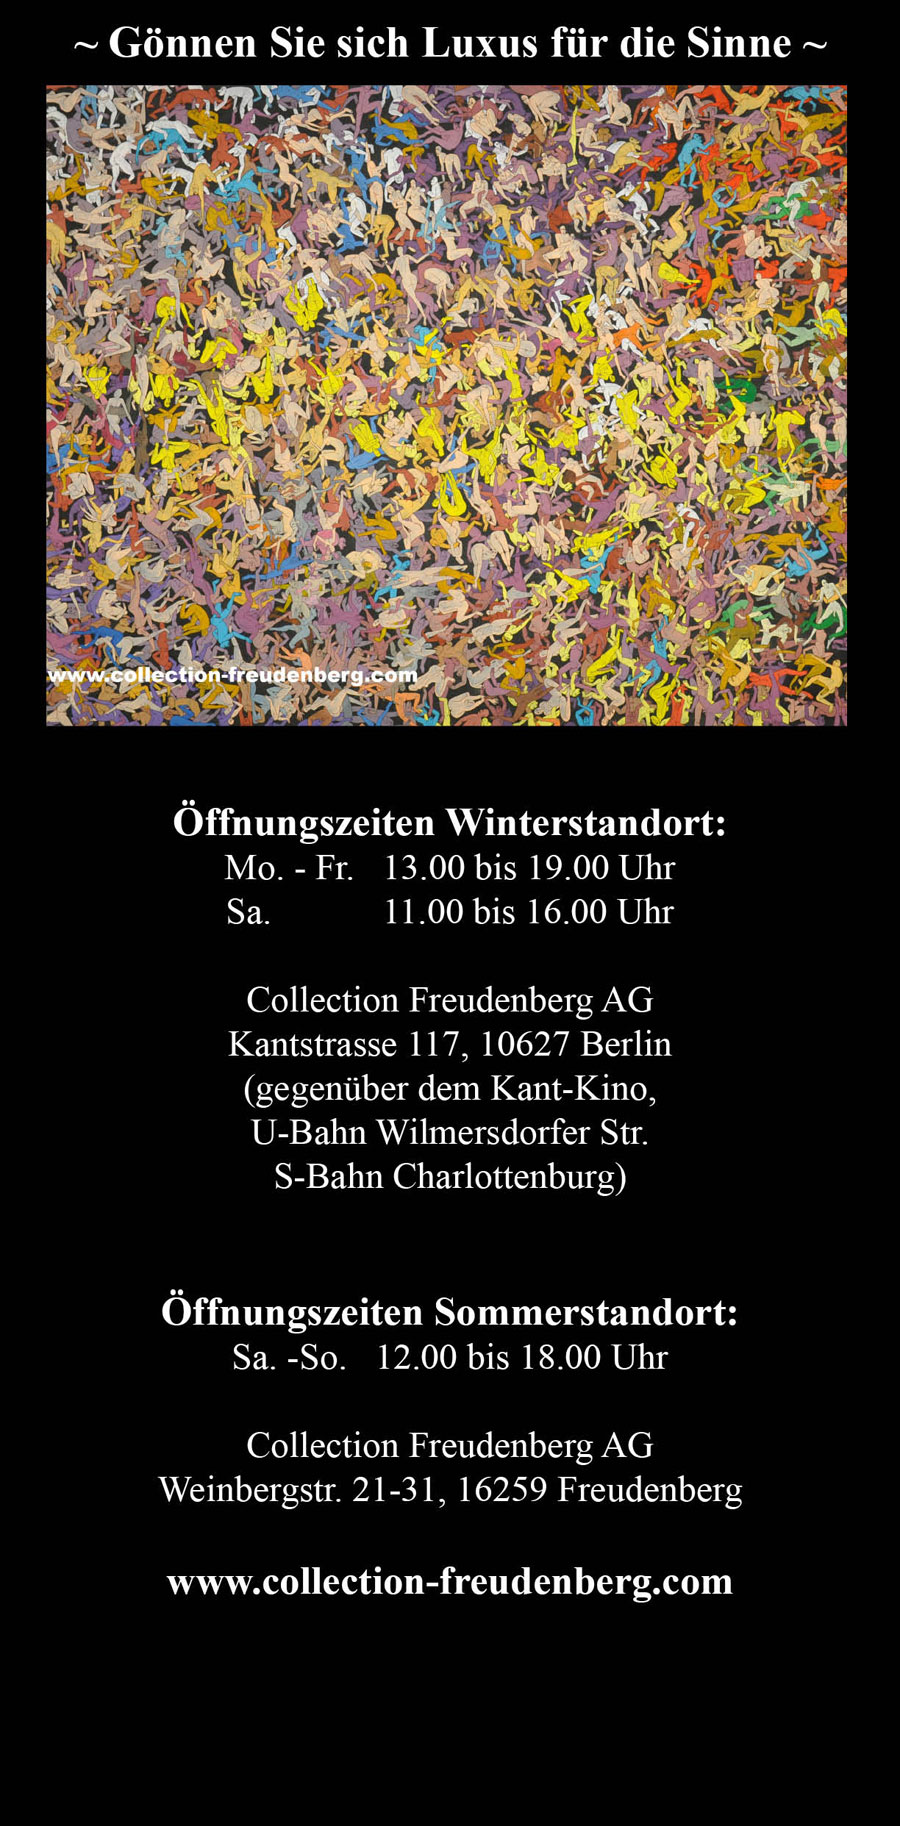 Exhibition's Flyer Collection Freudenberg